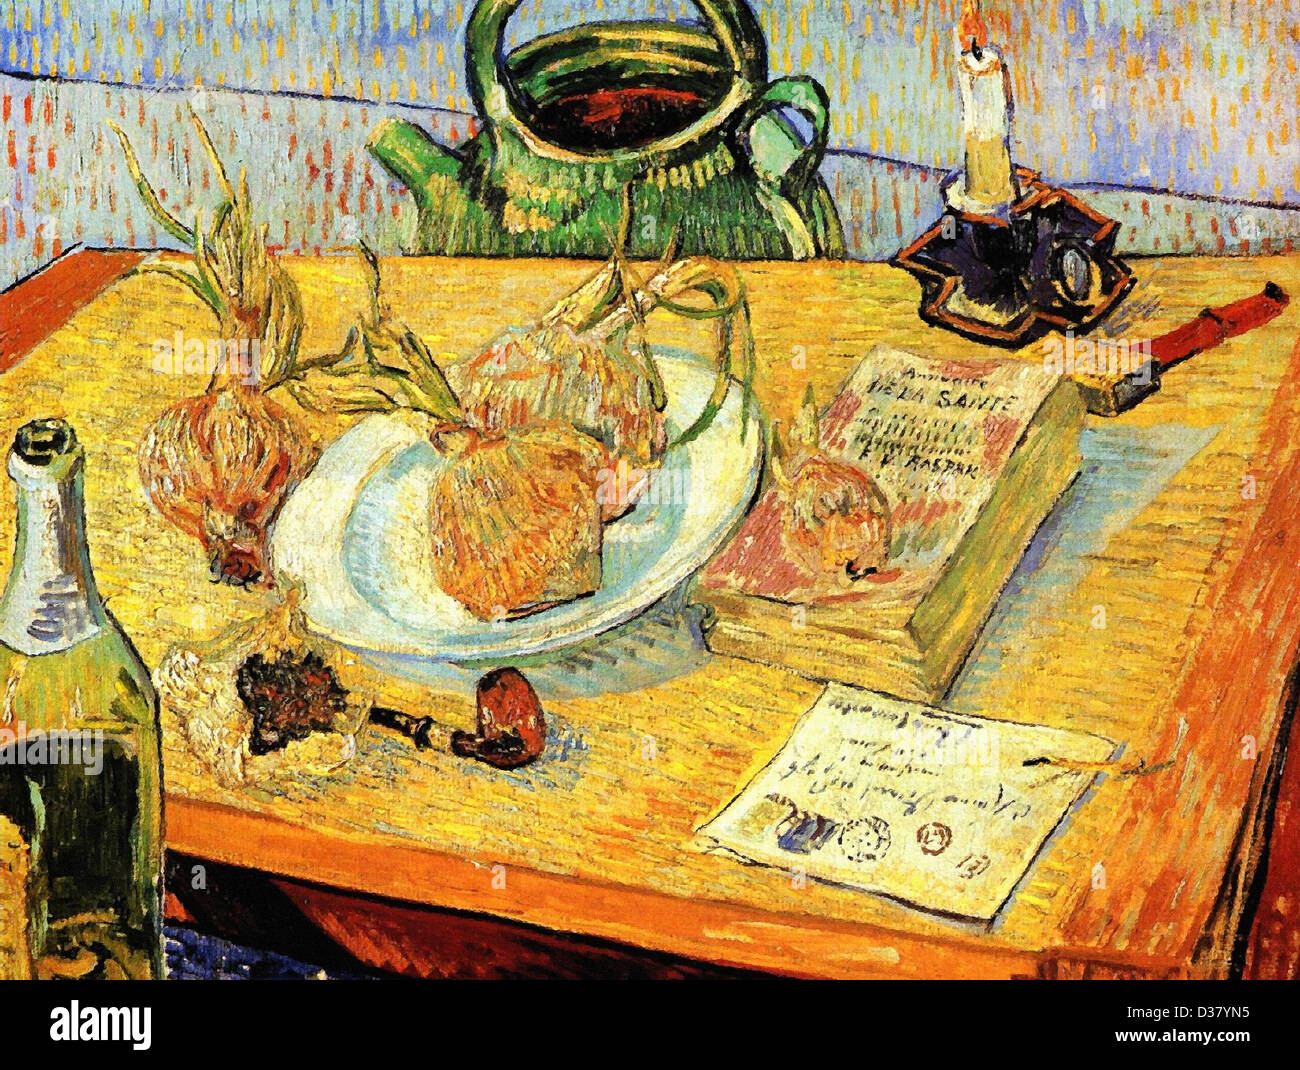 Vincent van Gogh, Still Life with Drawing Board, Pipe, Onions and Sealing-Wax. 1889. Post-Impressionism. Oil on canvas. Stock Photo